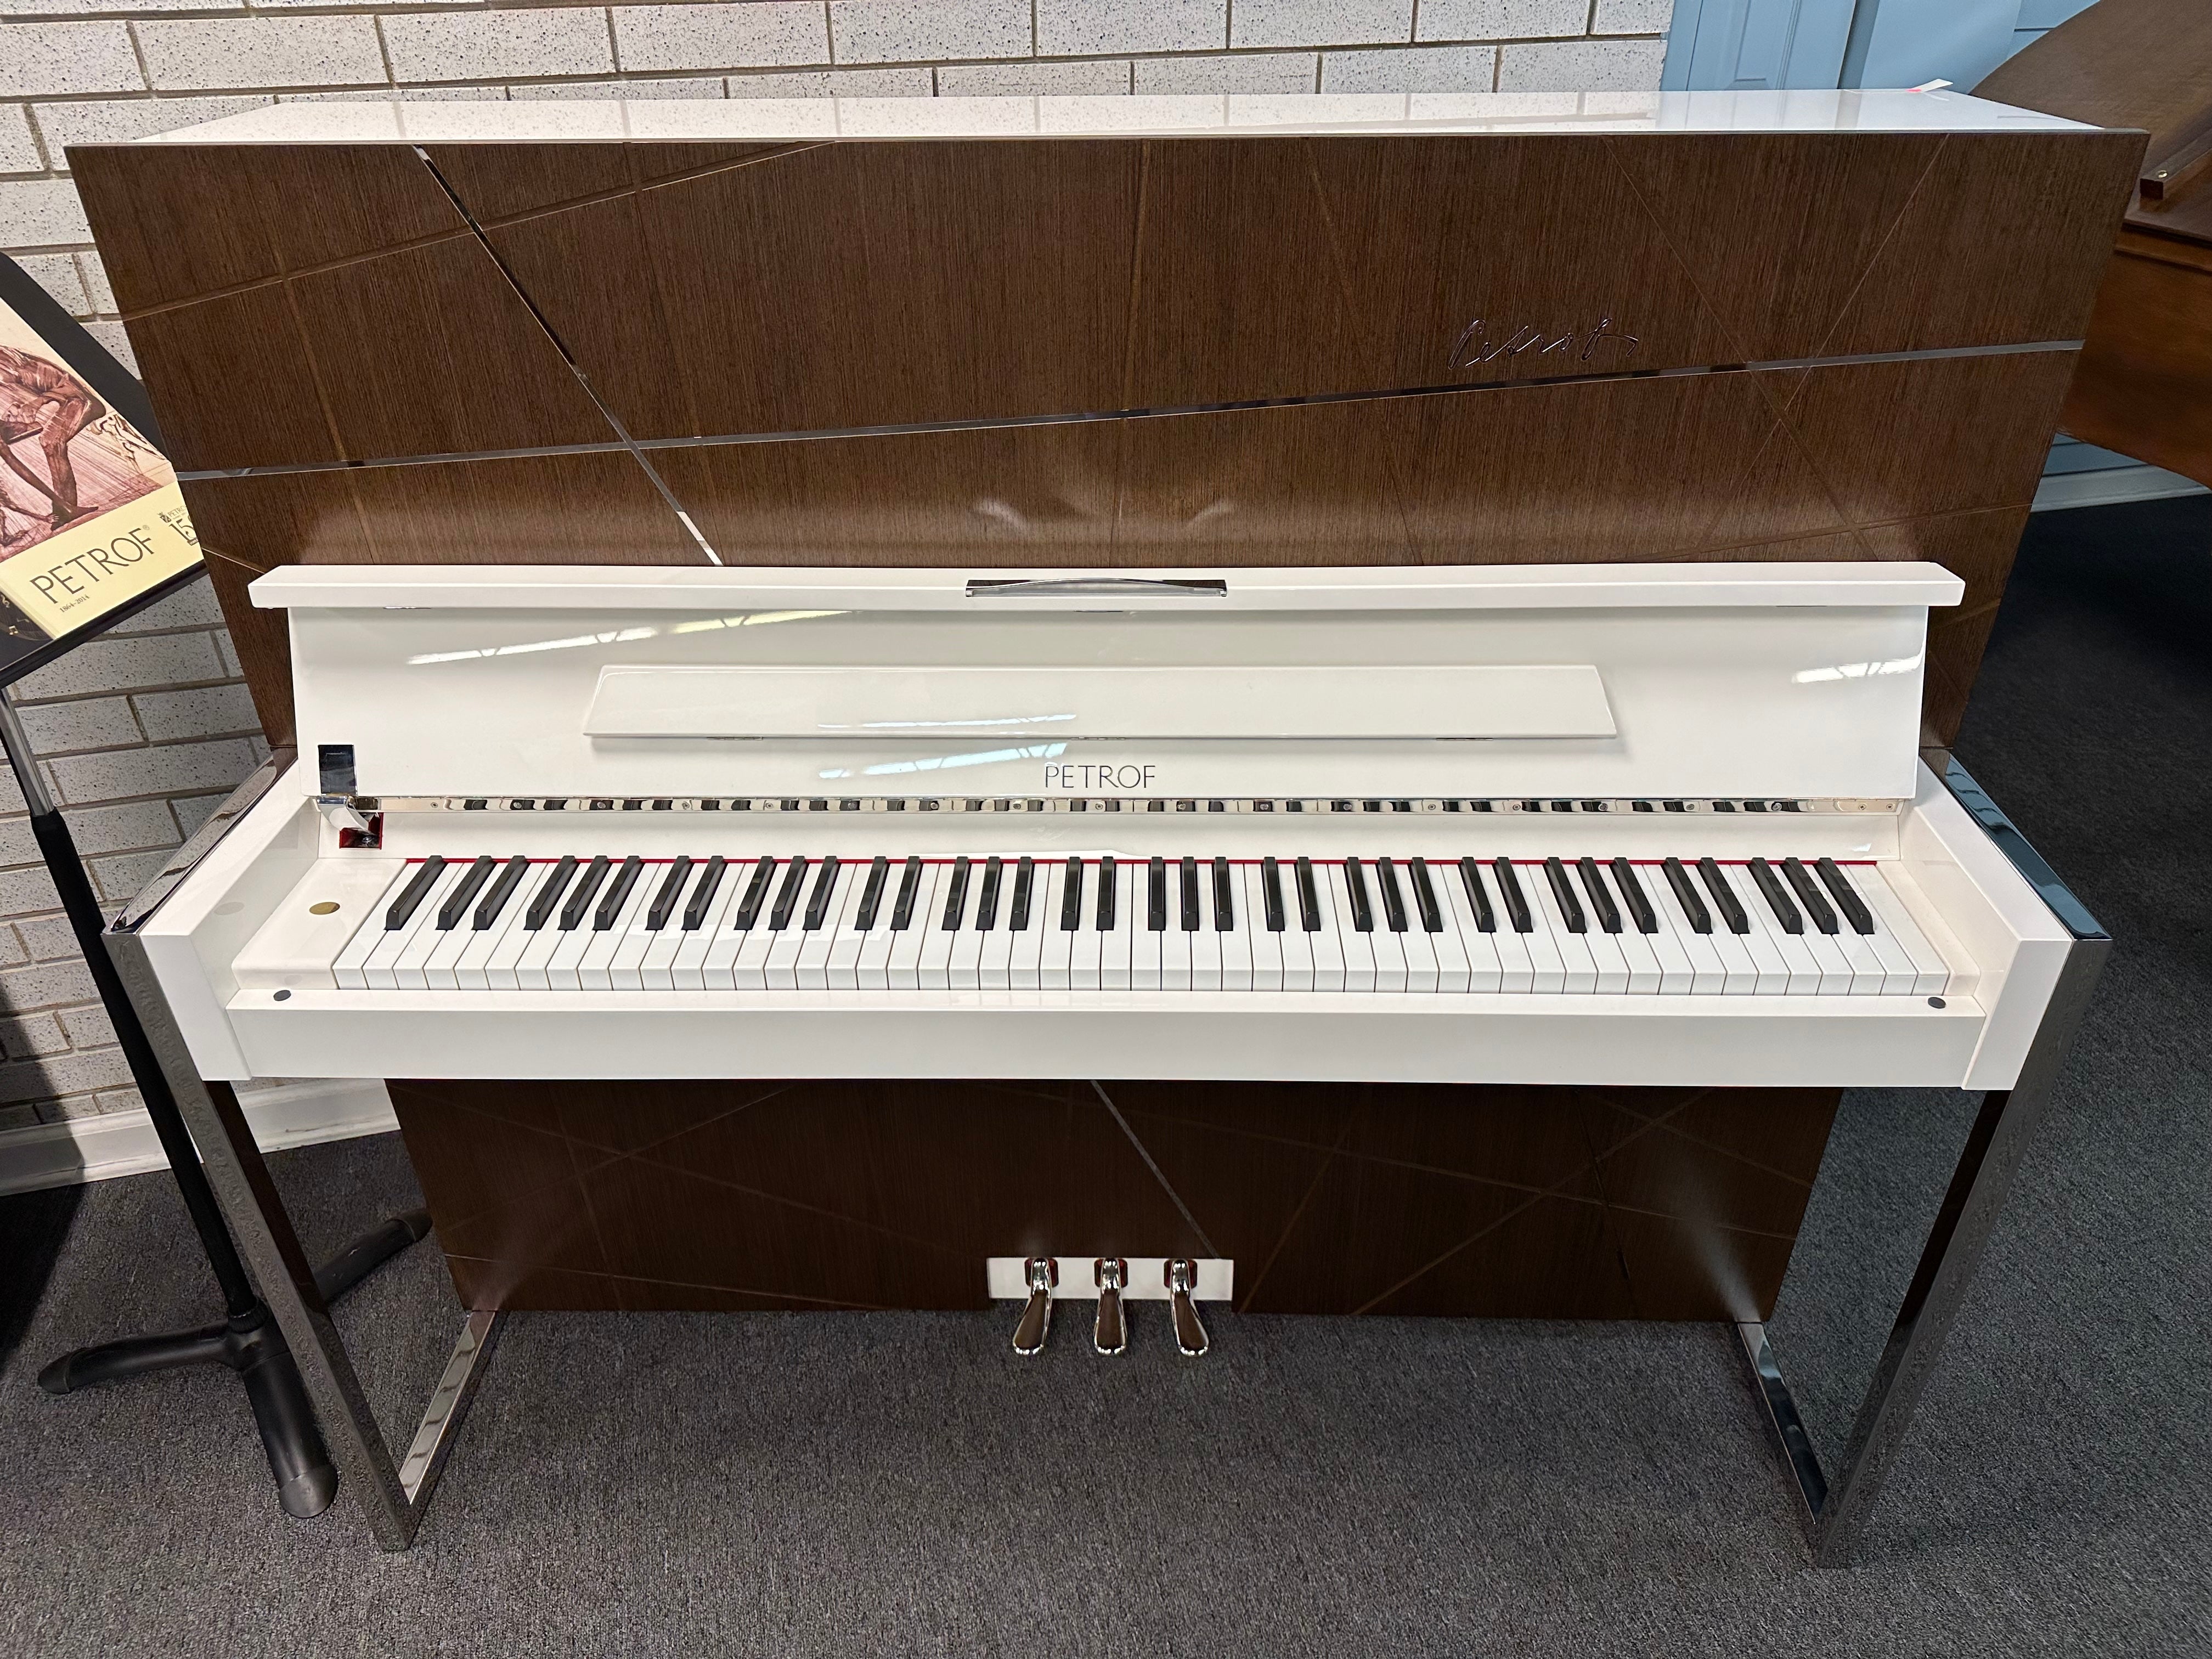 Petrof NEXT P127 (50") Upright Piano in White Polish with Wood Satin Wood Tones